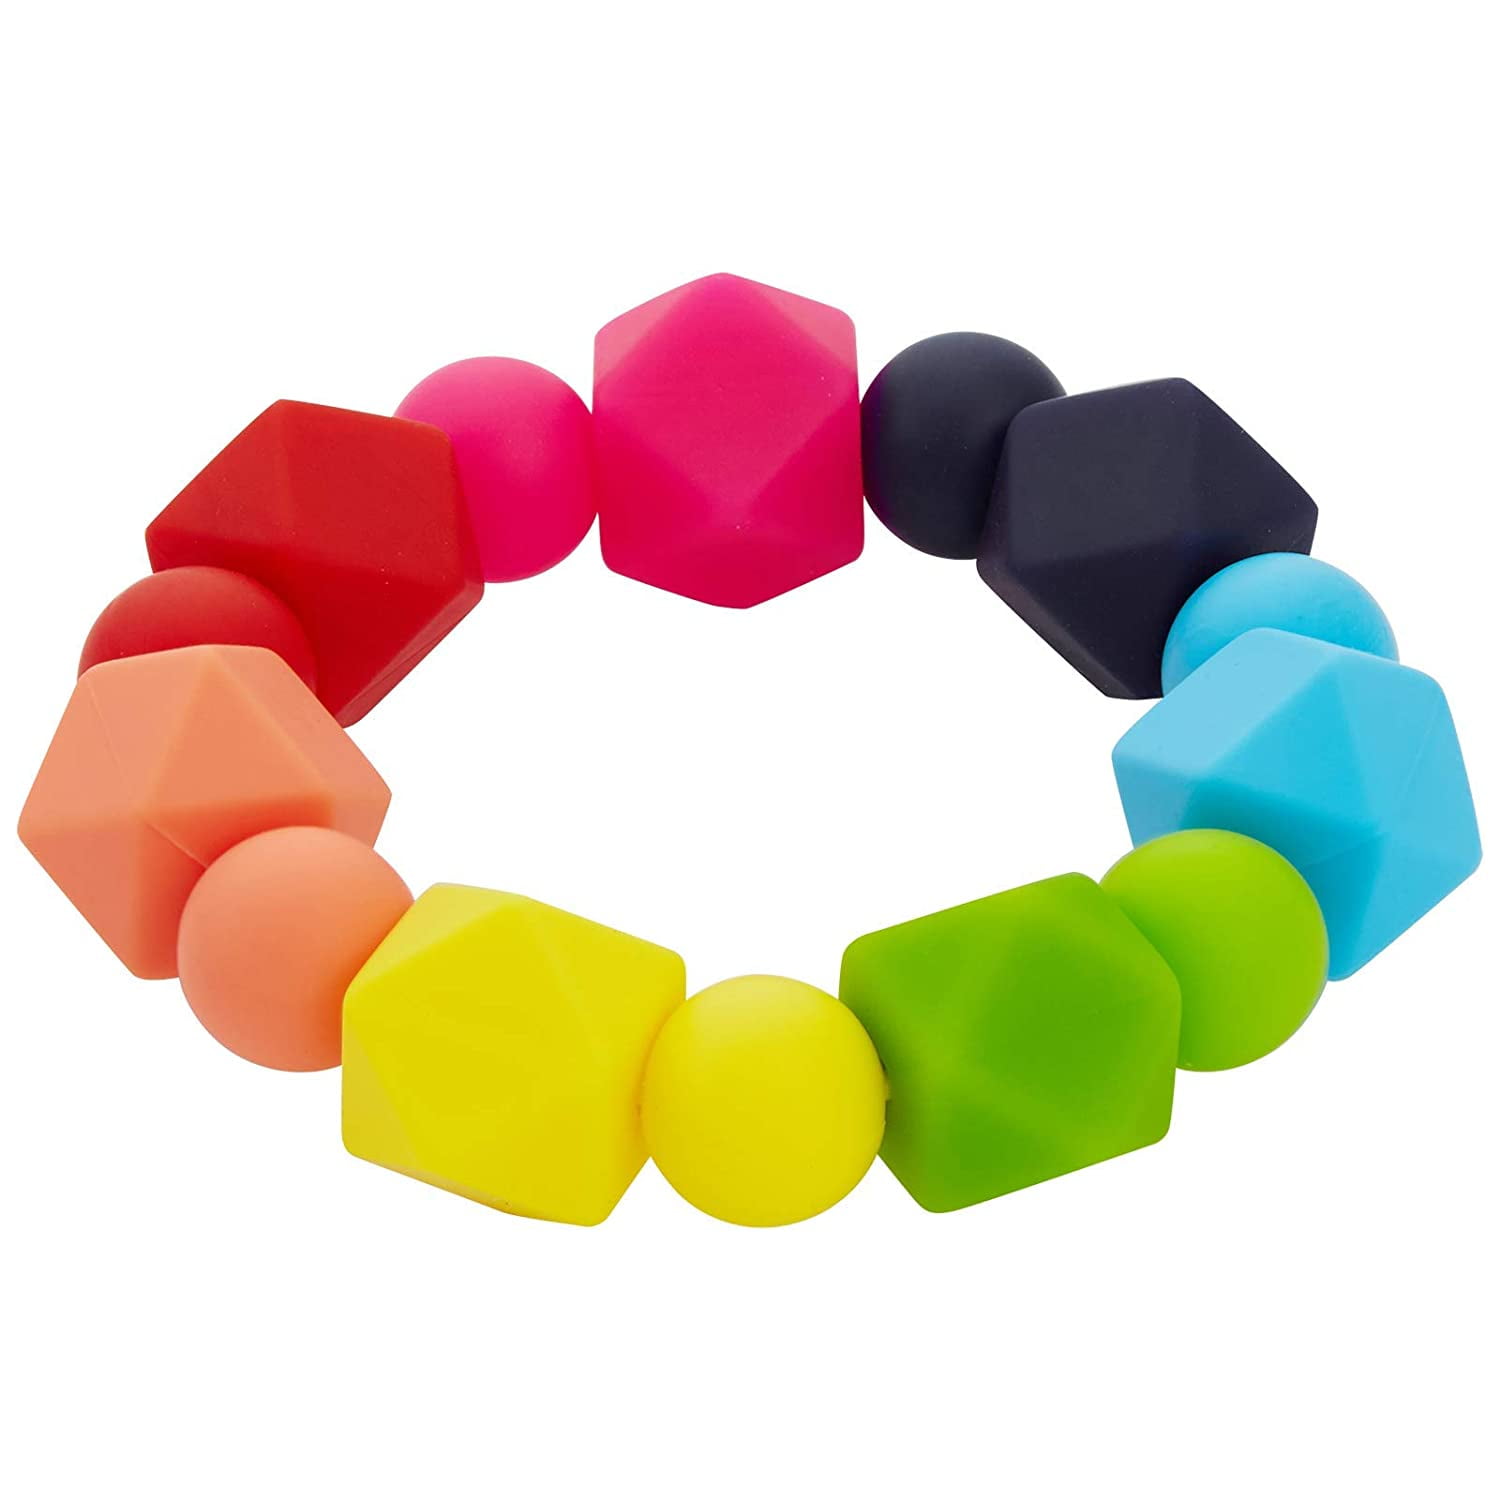 Tilcare Chew Chew Pencil Sensory Necklace 3 Set - Best for Kids or Adults